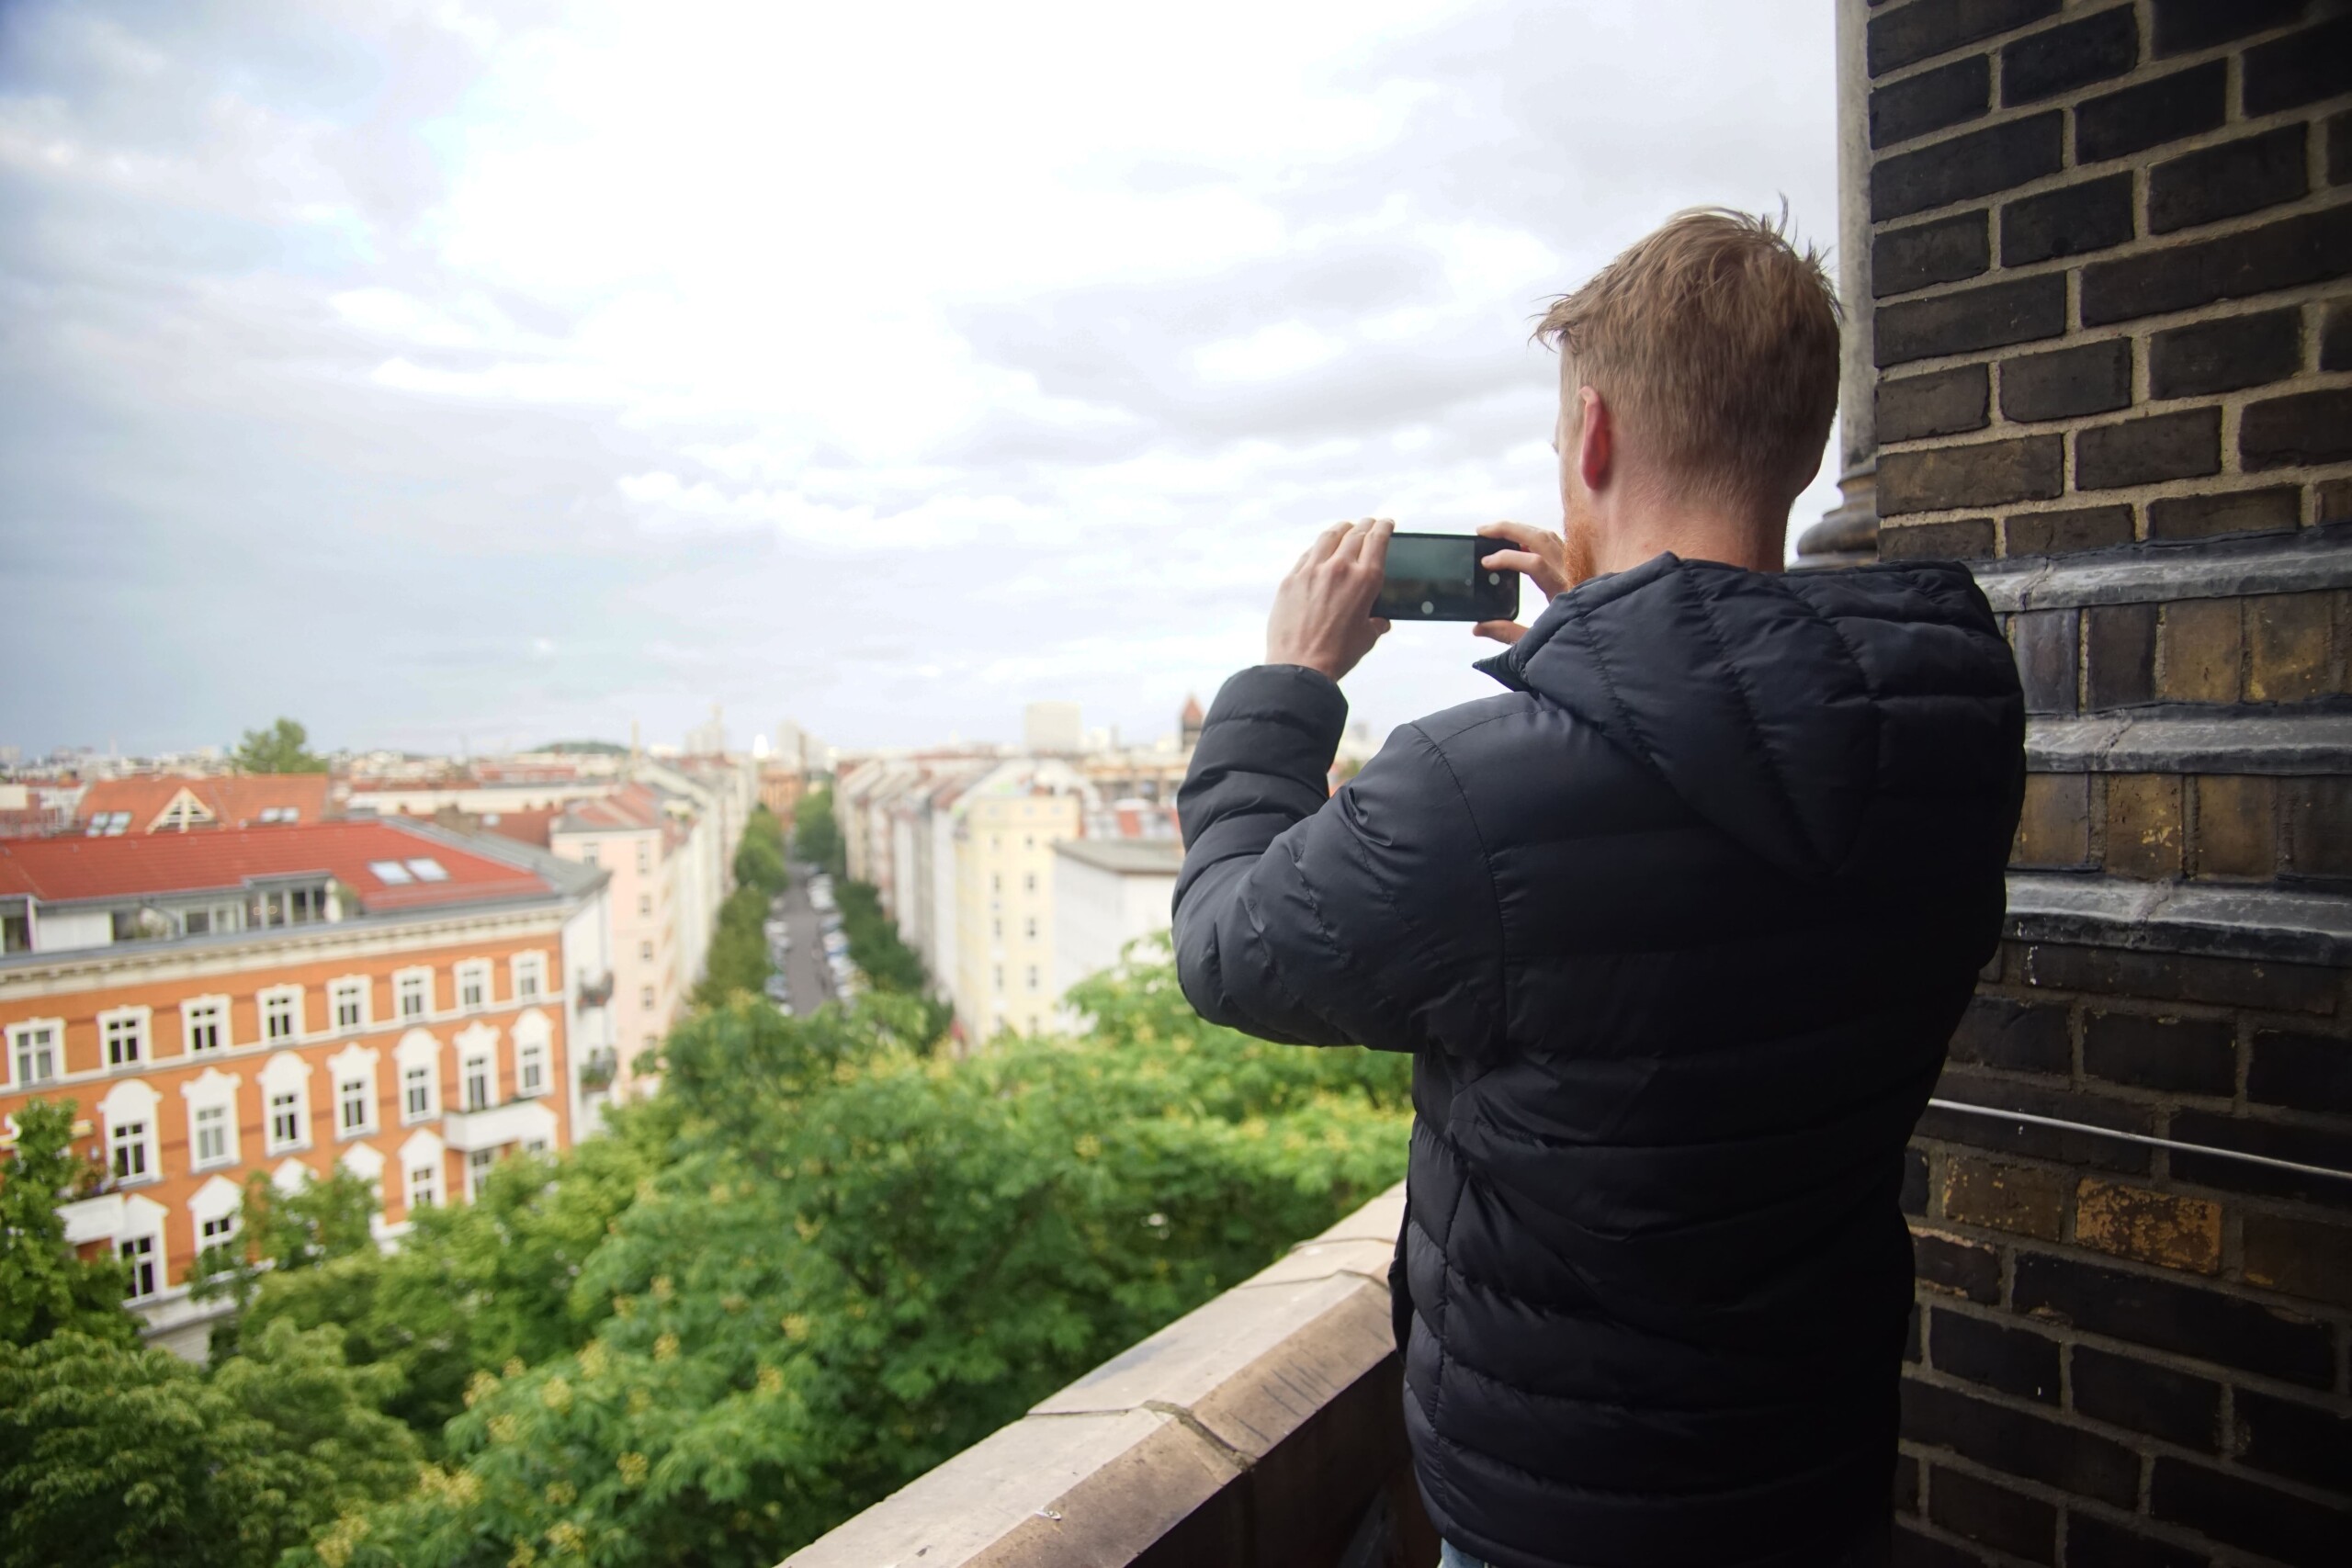 A man takes a photo from the top of the Zionskirche church in Berlin, Germany